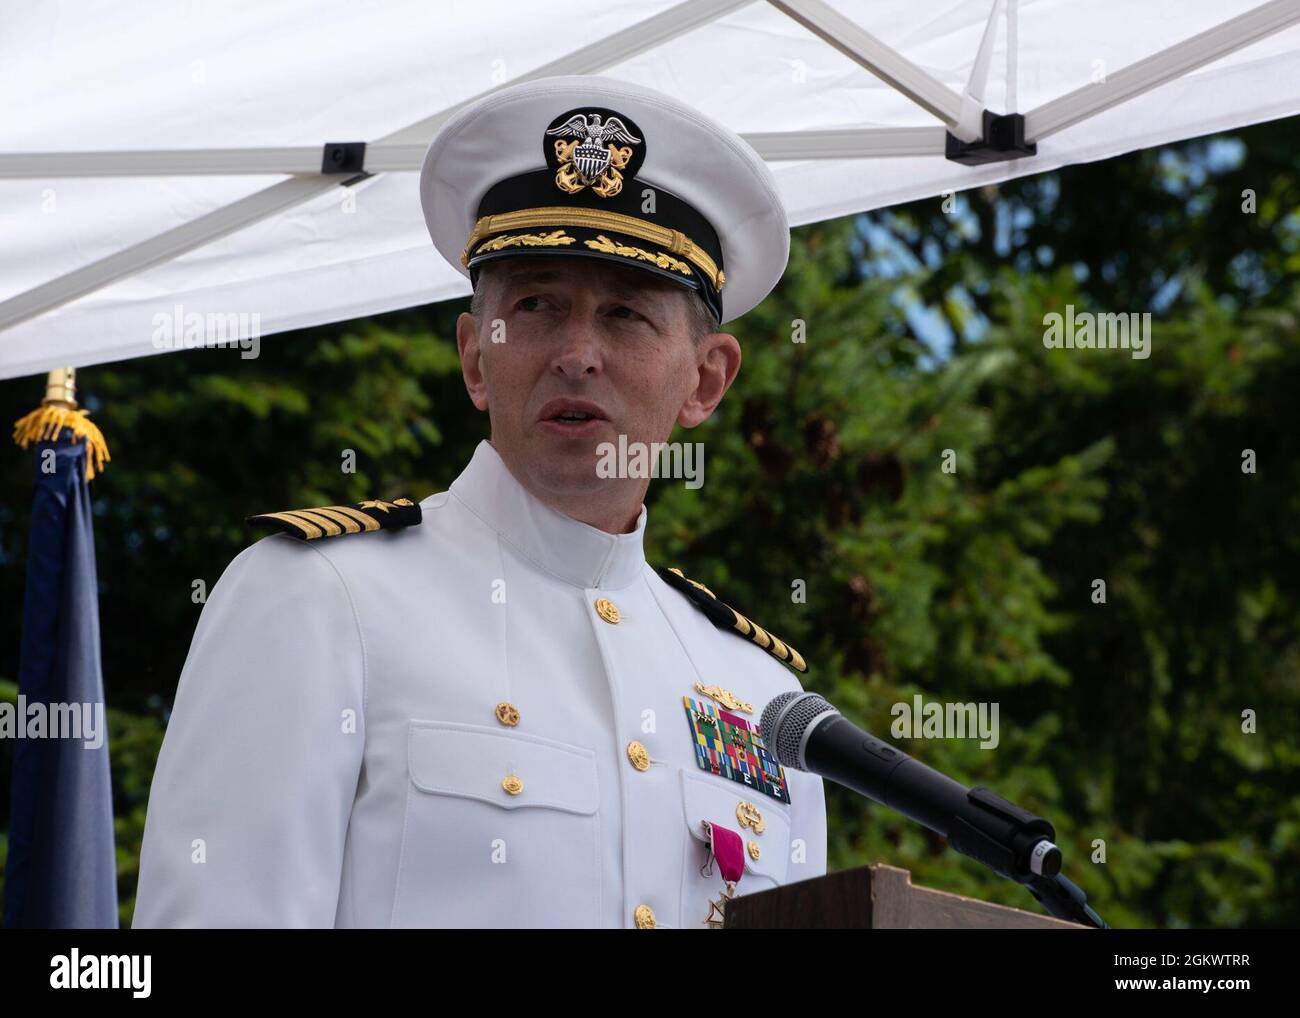 https://c8.alamy.com/comp/2GKWTRR/silverdale-wash-capt-richard-massie-delivers-his-remarks-during-a-change-of-command-ceremony-for-commander-submarine-squadron-19-july-13-capt-shawn-huey-properly-relieved-massie-as-commodore-during-the-ceremony-held-at-deterrent-park-on-naval-base-kitsap-bangor-2GKWTRR.jpg